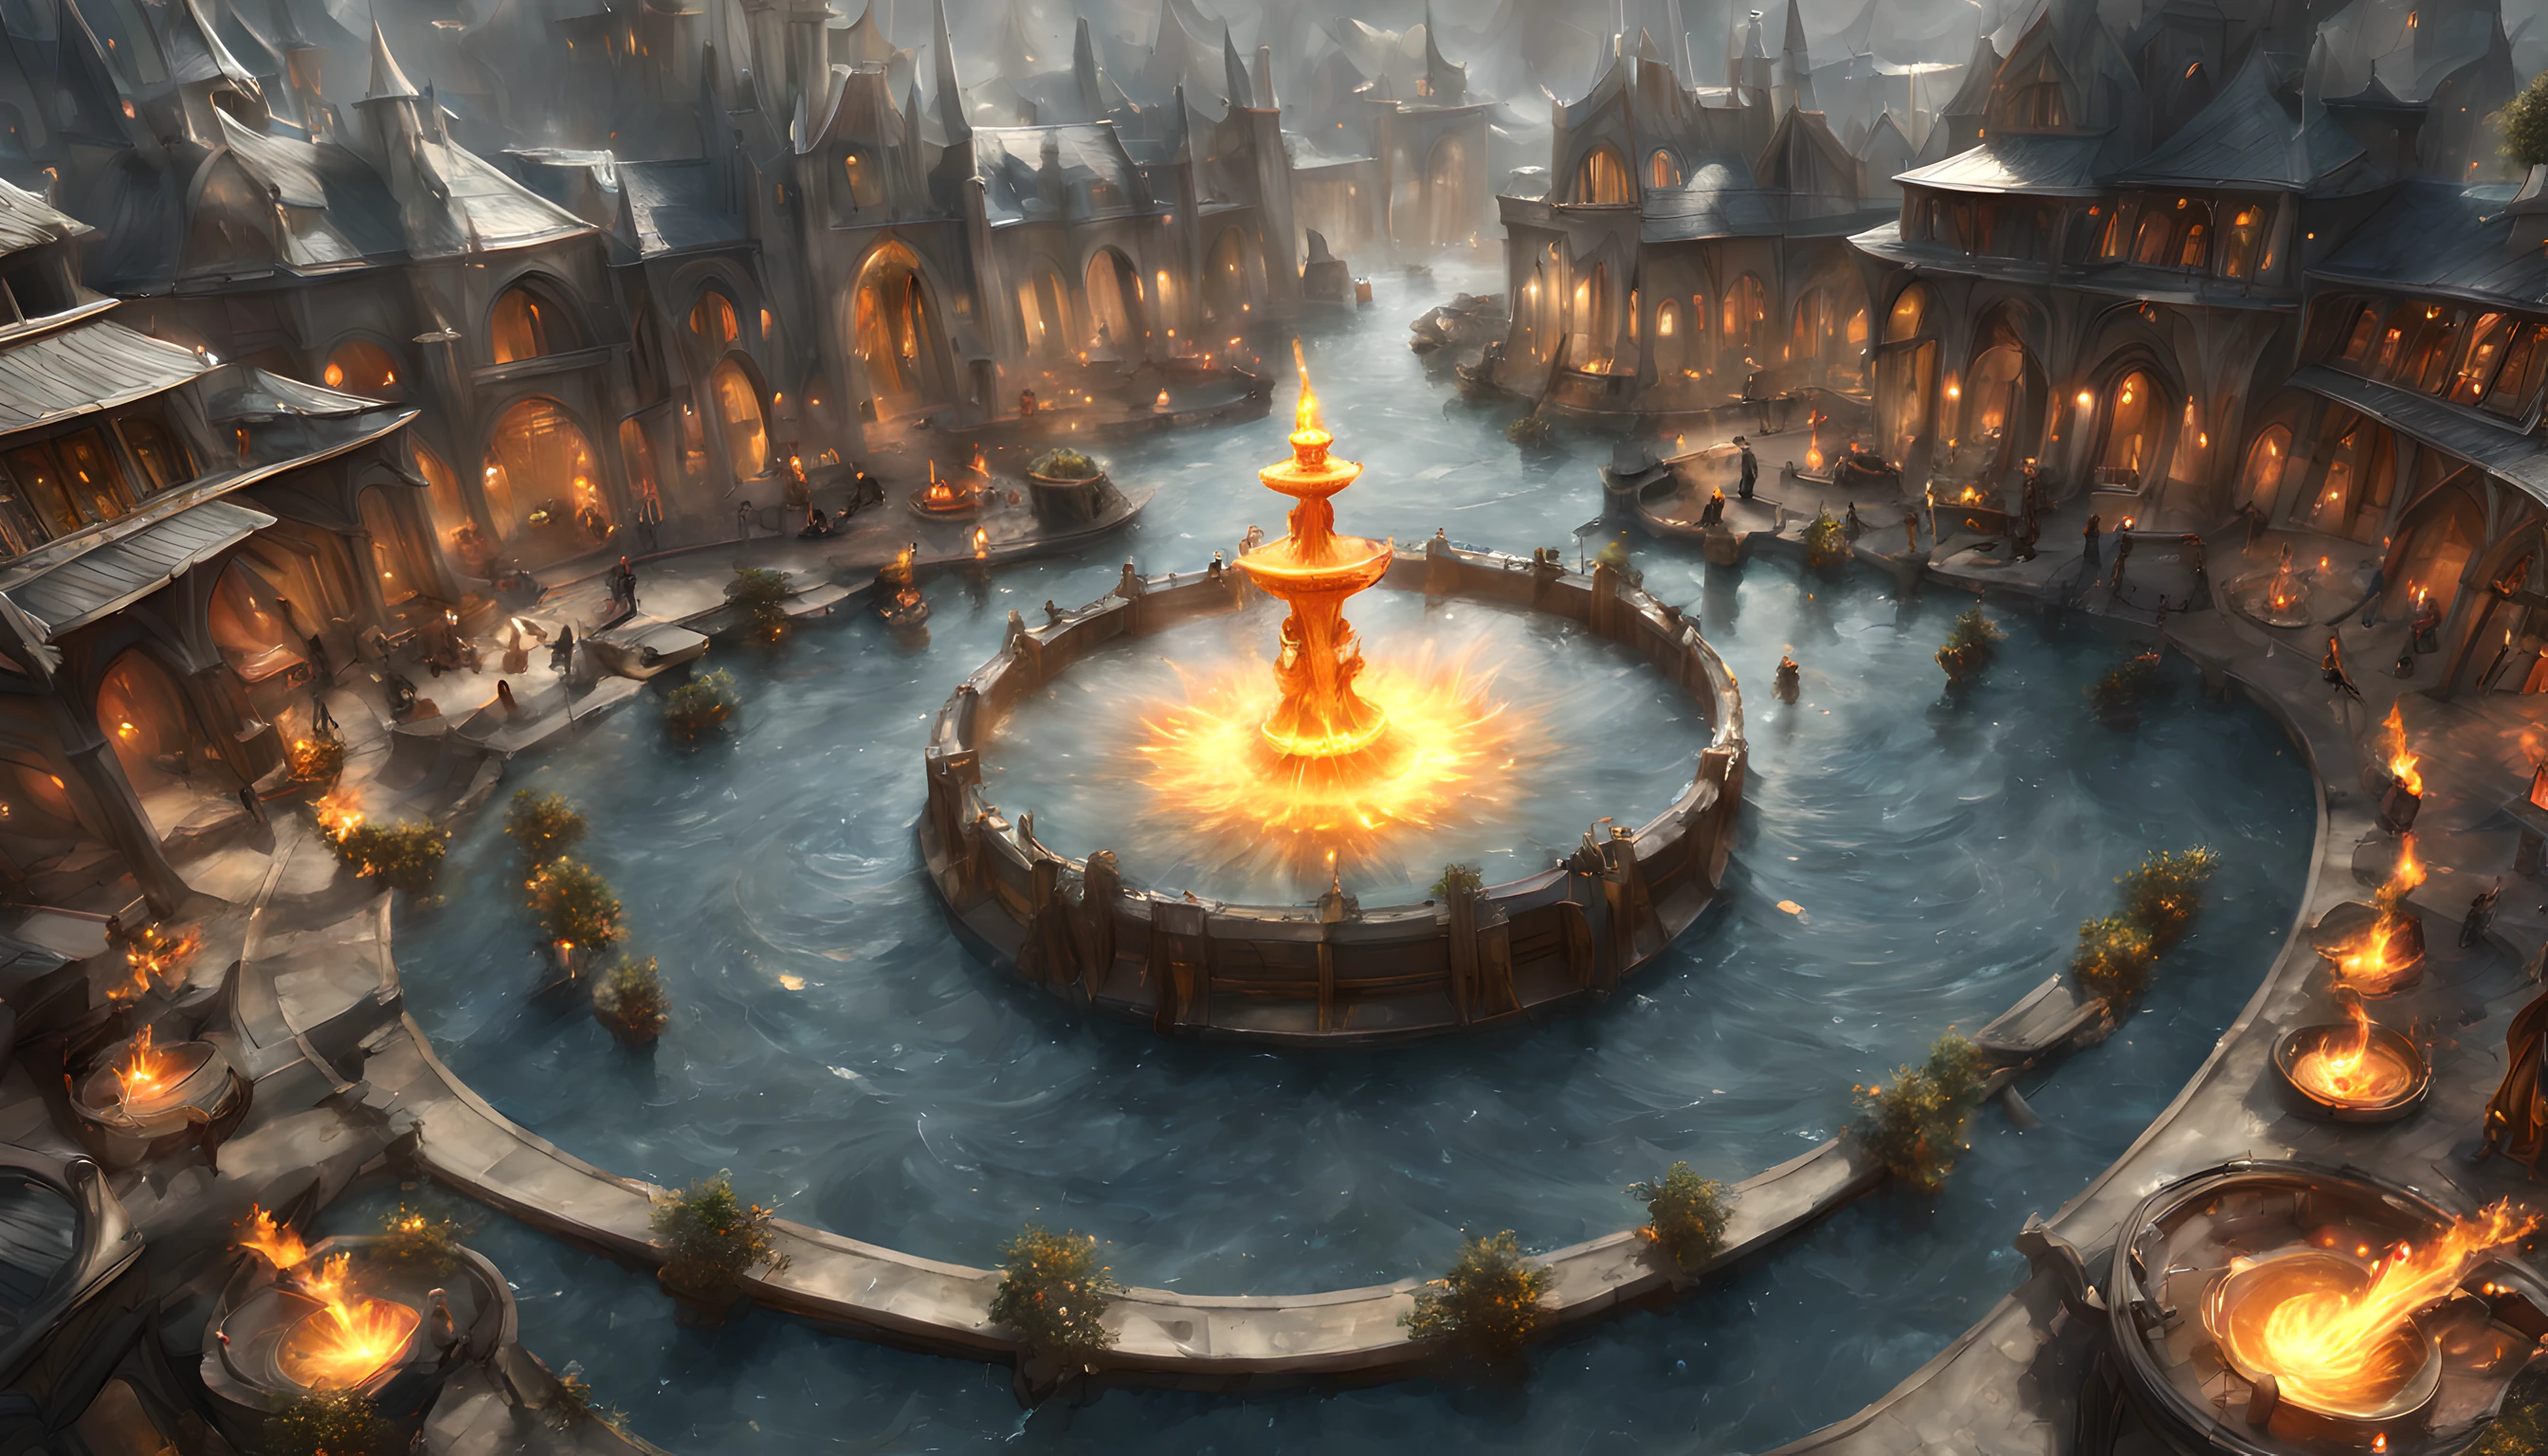 Fantasy art, RPG art, RAWת there is an epic sized magical (water fountain: 1.3) in an elven city town square, it has magical runes gl0w1ngR in the basin of the fountain, many rivulets of water entwined in (fire: 1.2), faize, the fire is combined with the water streams, its night time, moon is rising, photorealistic, 16k, RAW, award winning, (best detailed: 1.5), masterpiece, best quality, (ultra detailed), full body, ultra wide shot, abstract fractal